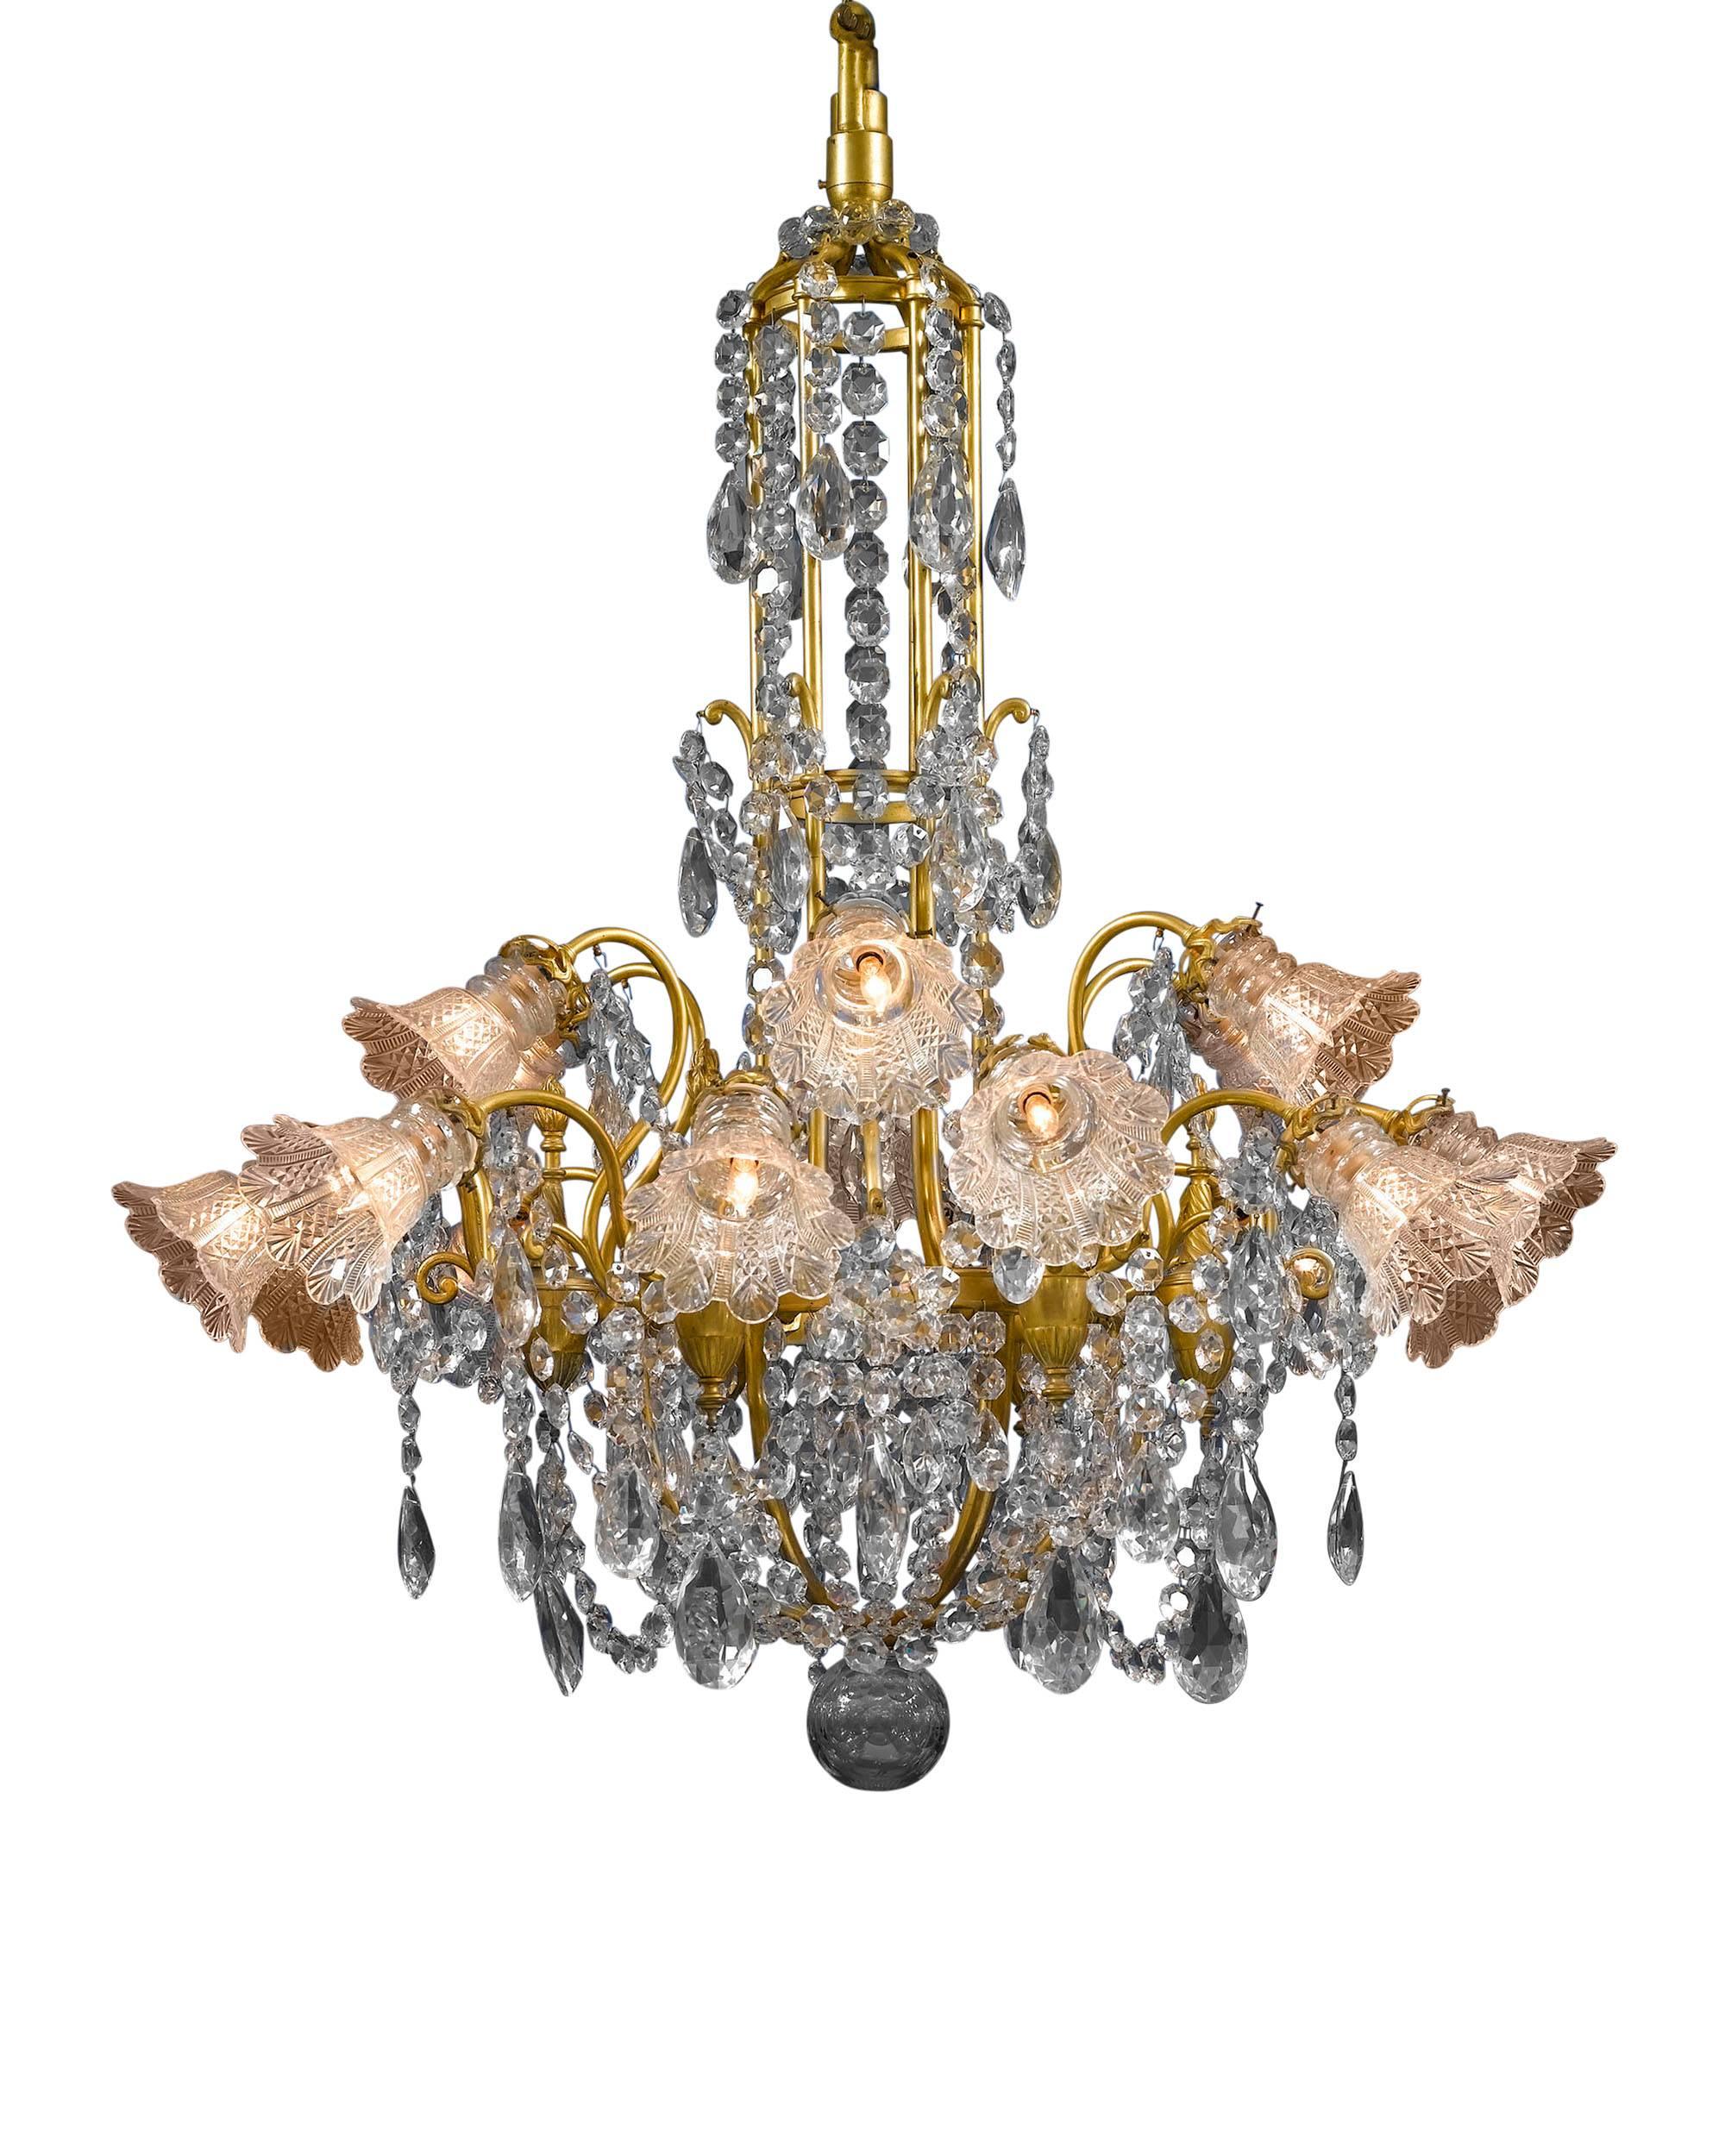 This Baccarat crystal and doré bronze chandelier of monumental size and opulent design is truly a splendid sight to behold. Hundreds of beautifully designed oversized, luminous prisms and beads of Baccarat crystal hang from scrolling branches of